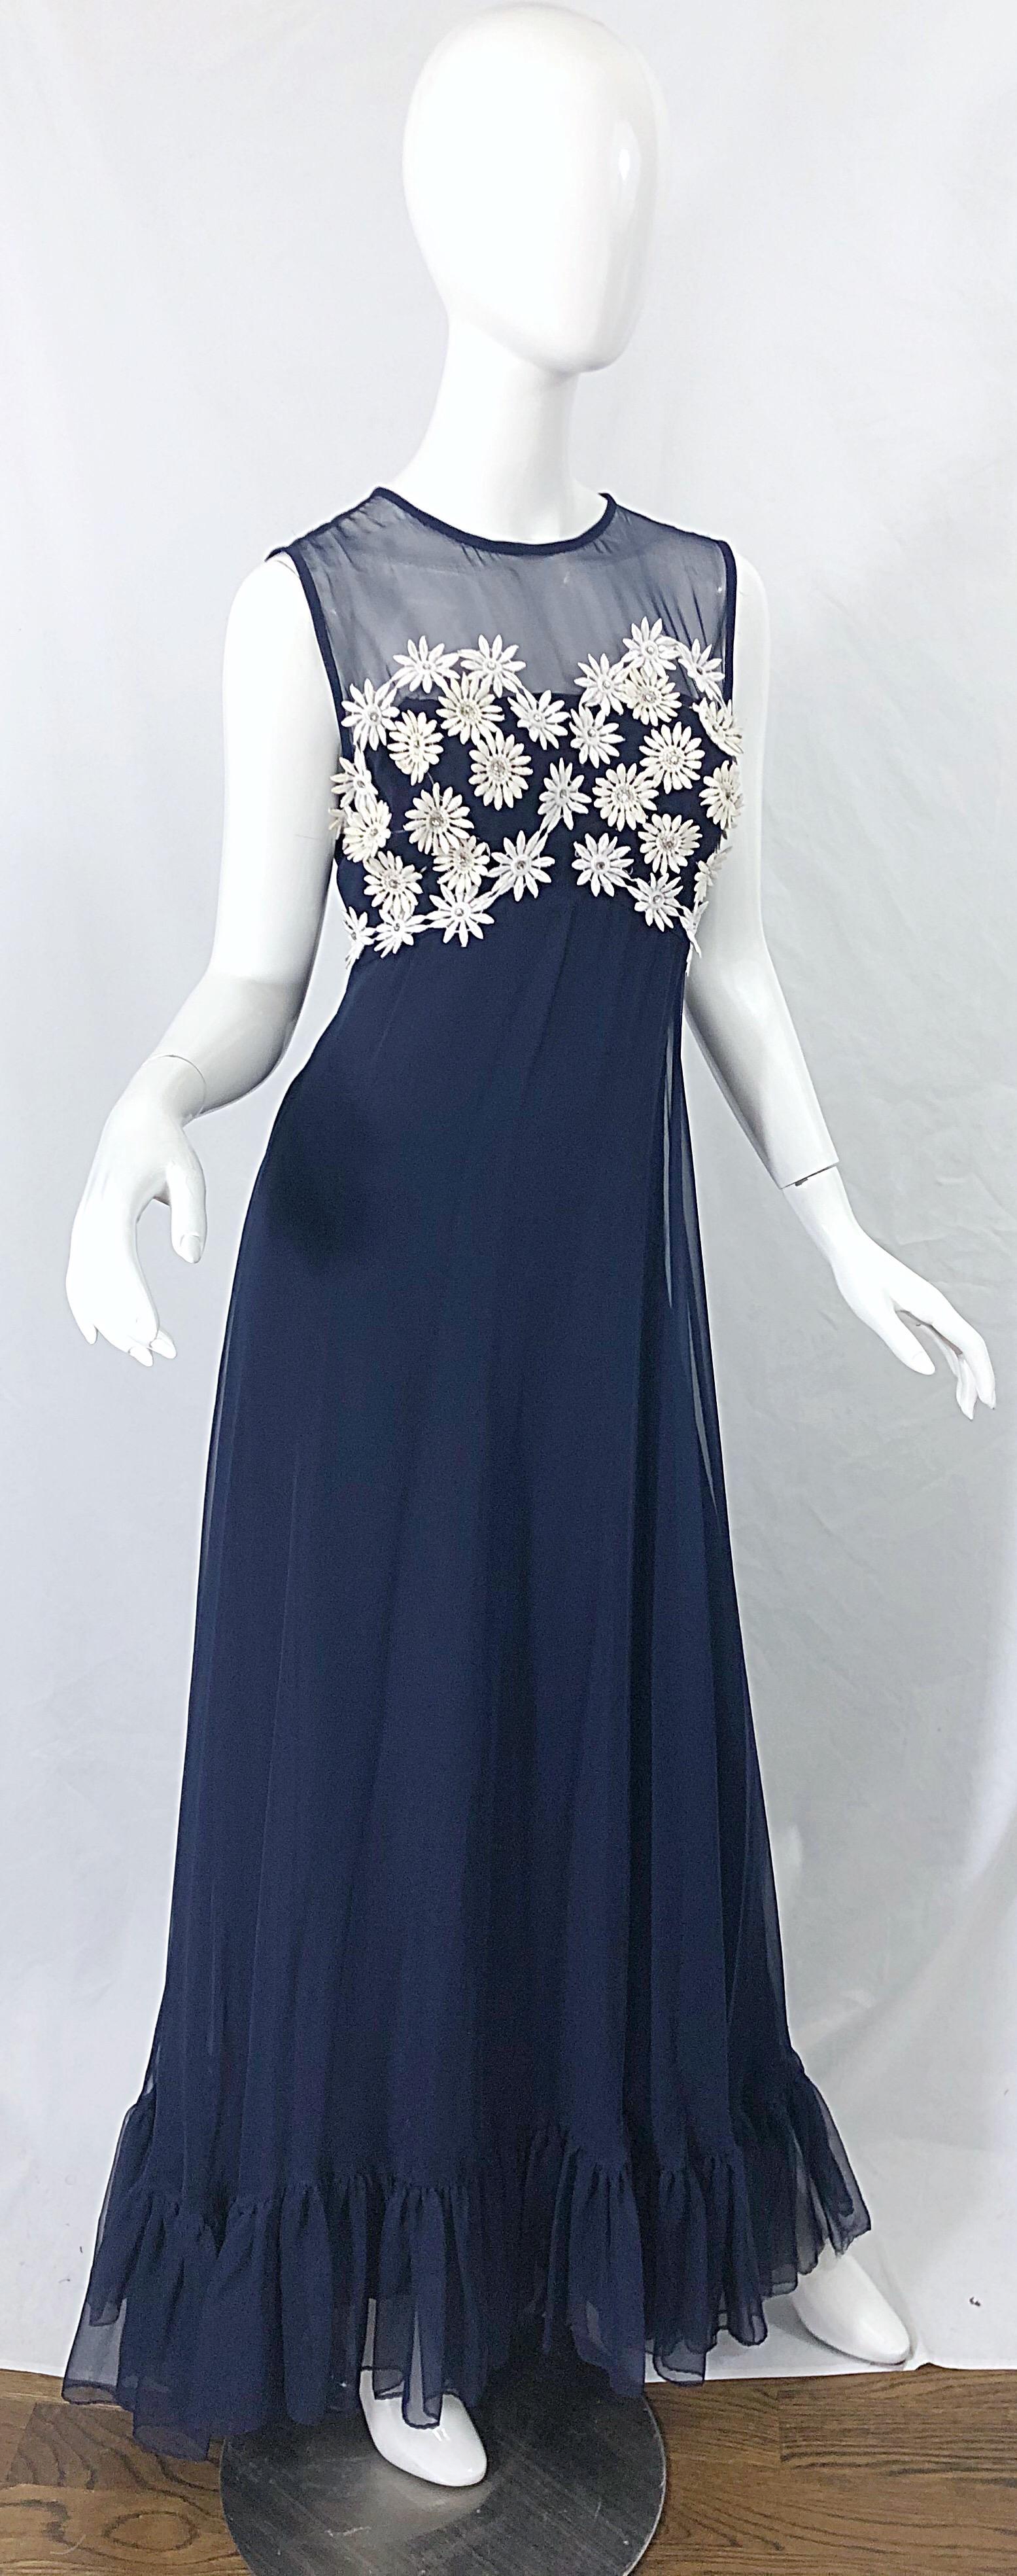 1960s Navy Blue Chiffon White Rhinestone Flowers Vintage 60s Gown Maxi Dress For Sale 3